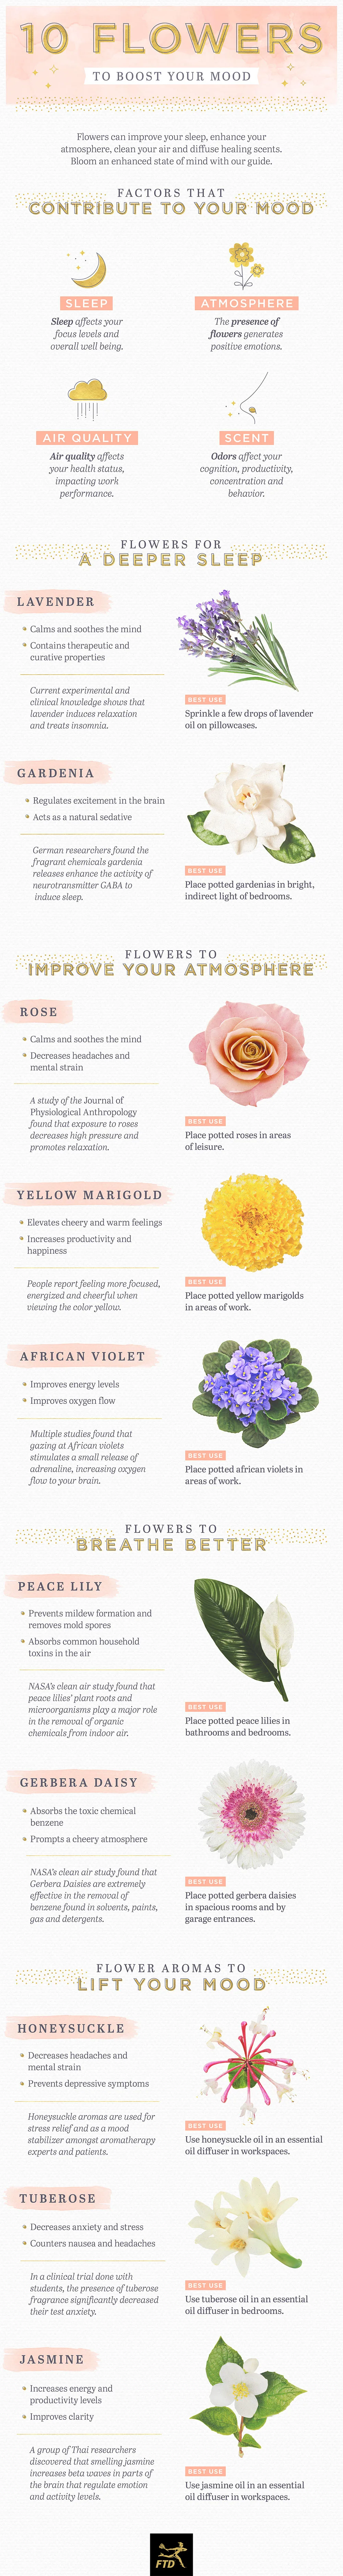 10 Flowers to Boost Your Mood + Bloom a Smile